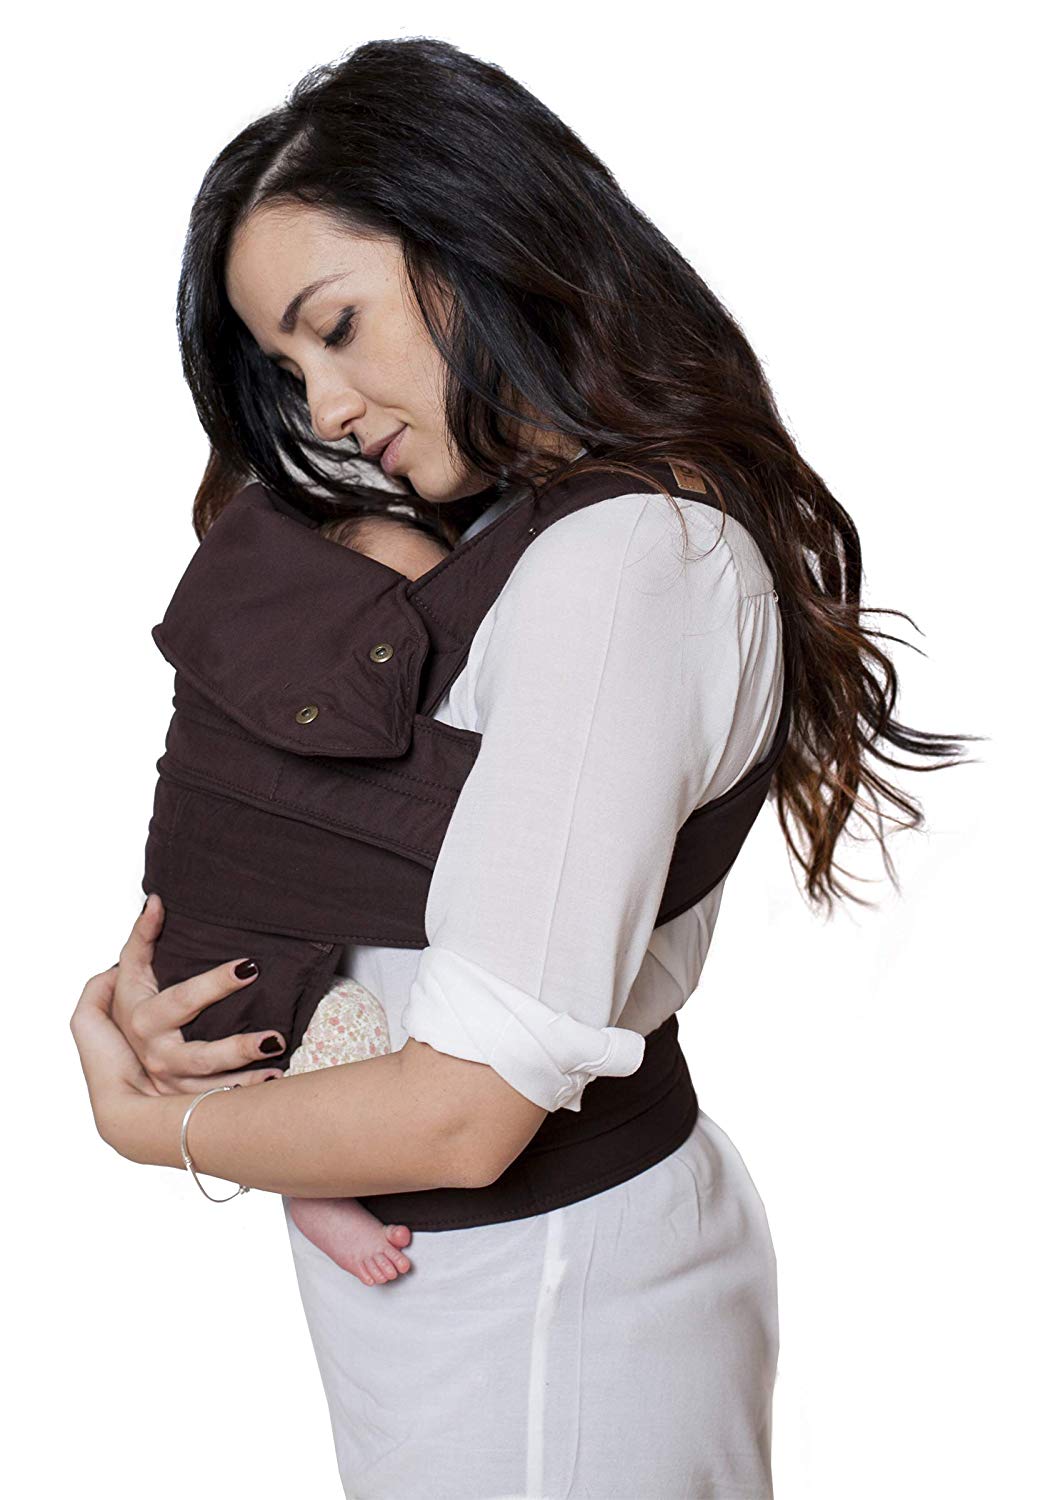 V baby carrier. Classic l